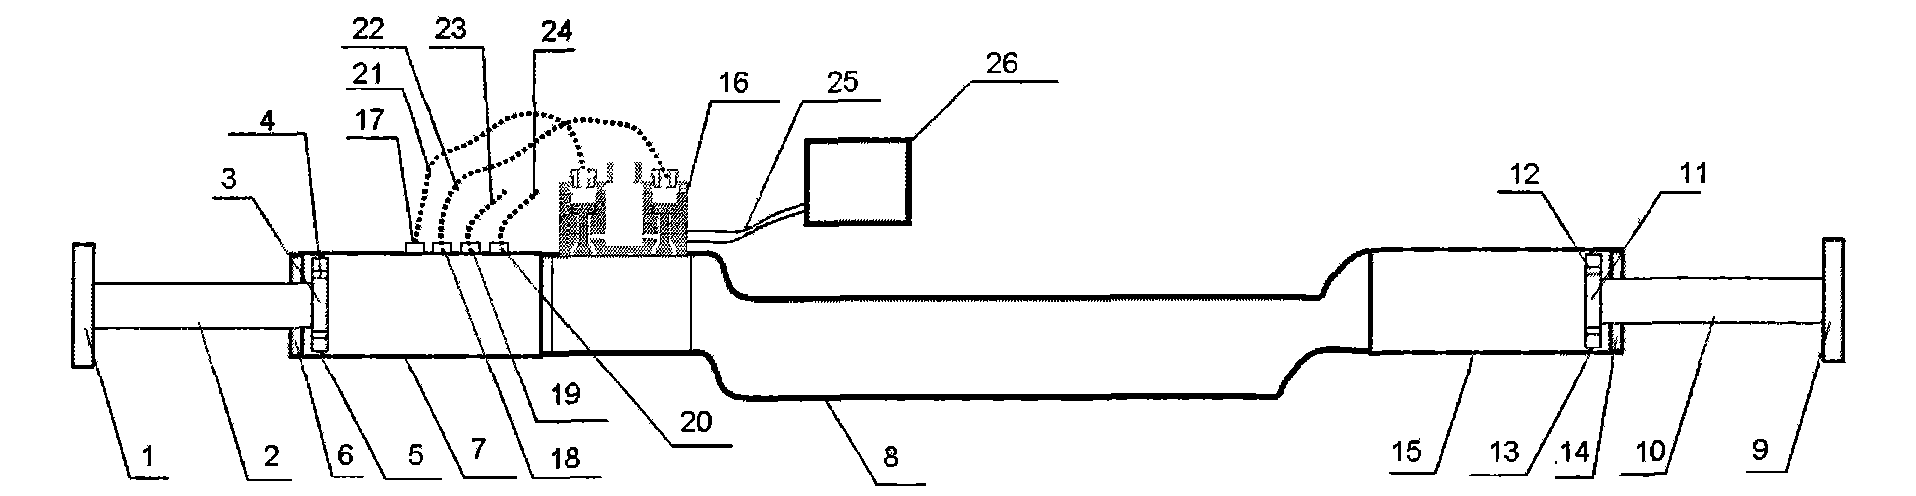 Automotive vehicle collision device with novel switch type jetting energy dissipater